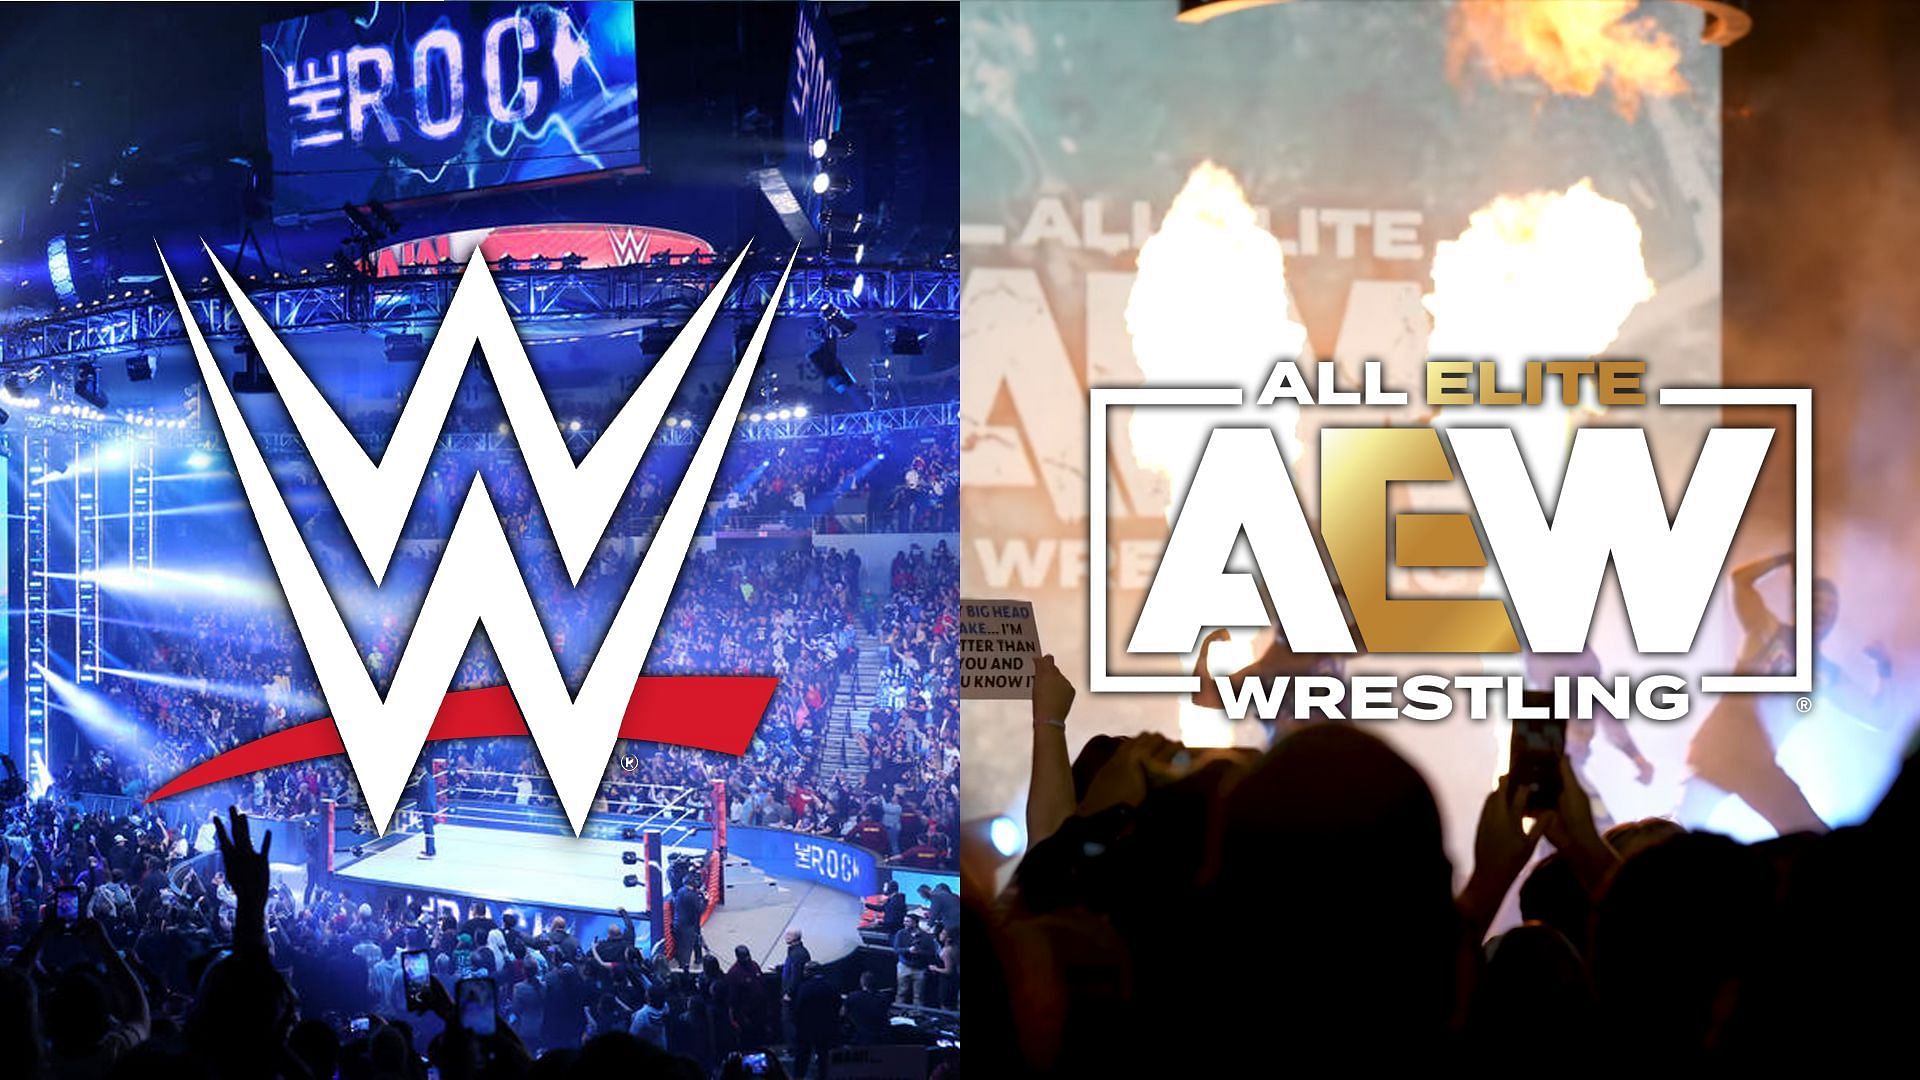 WWE recently snagged a former AEW star (image credits: WWE.com, All Elite Wrestling on YouTube)